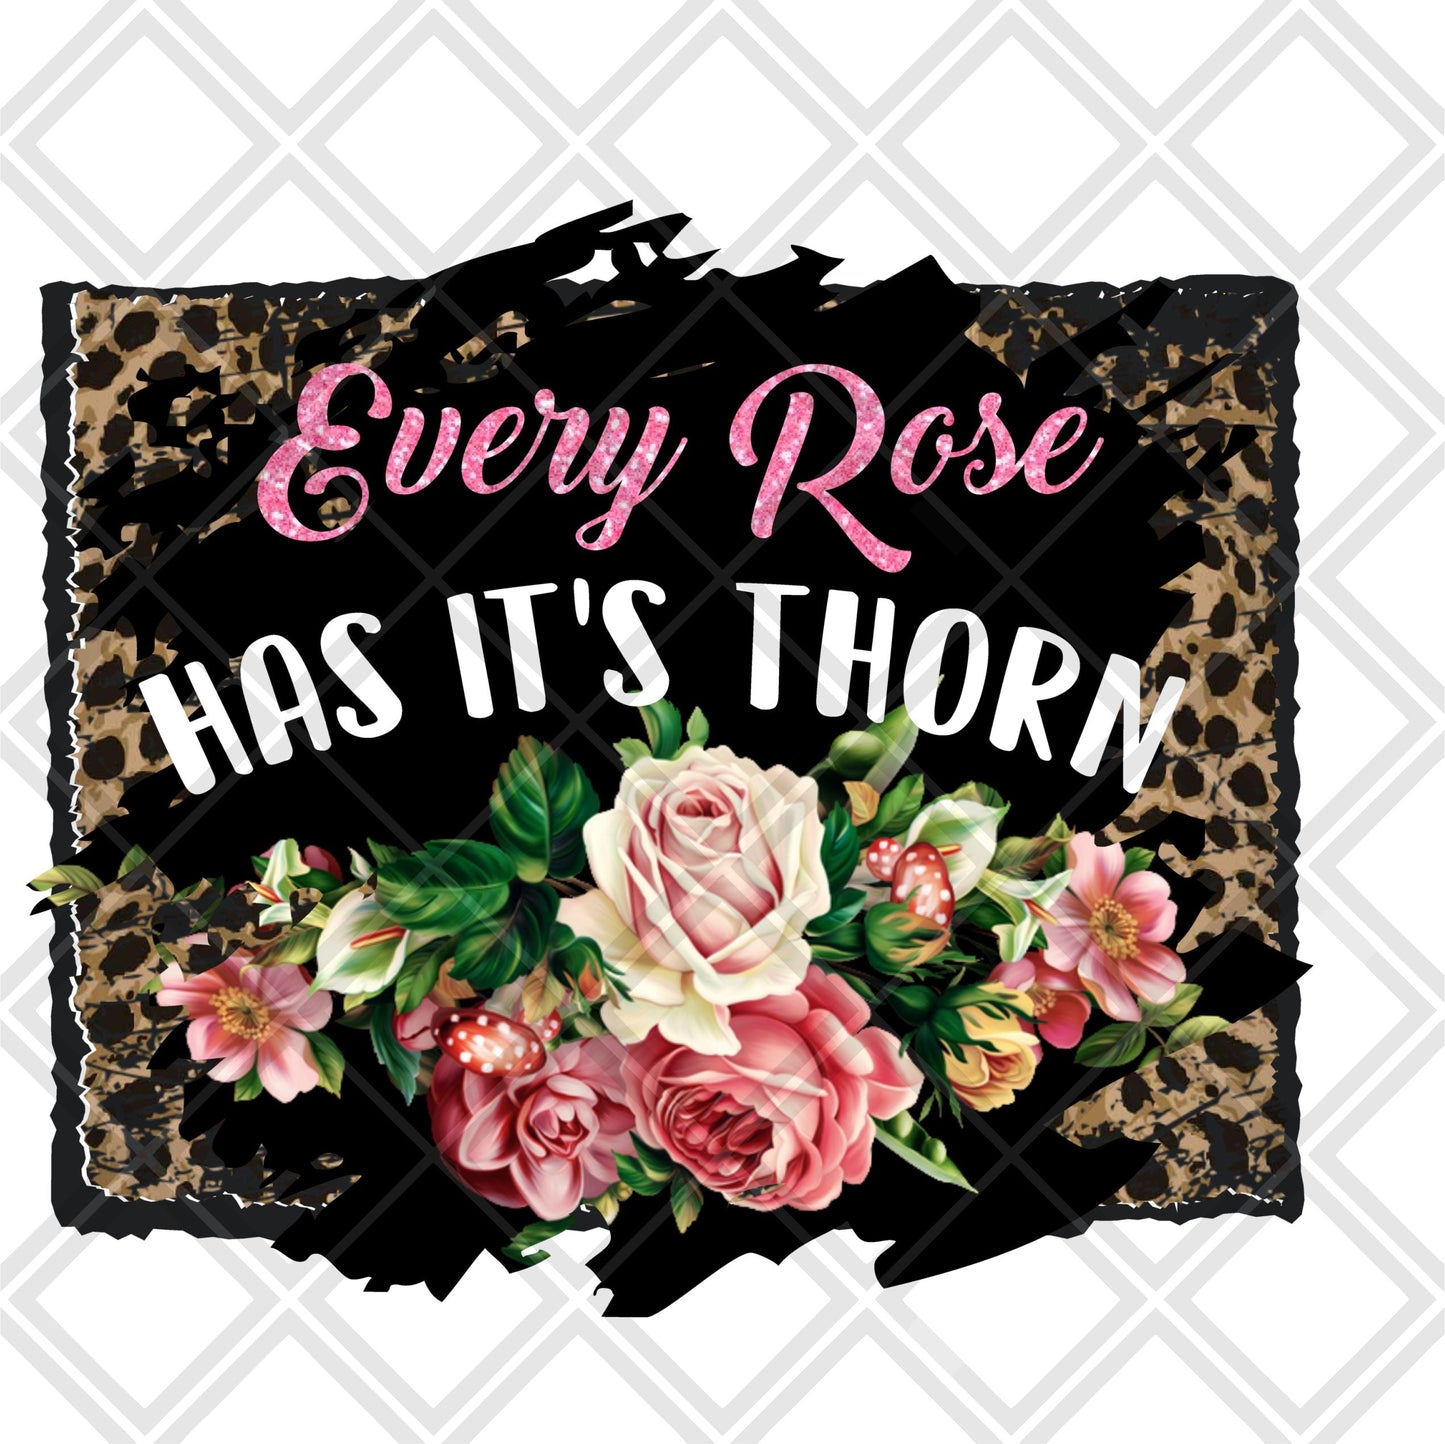 Every rose has a thorn frame Digital Download Instand Download